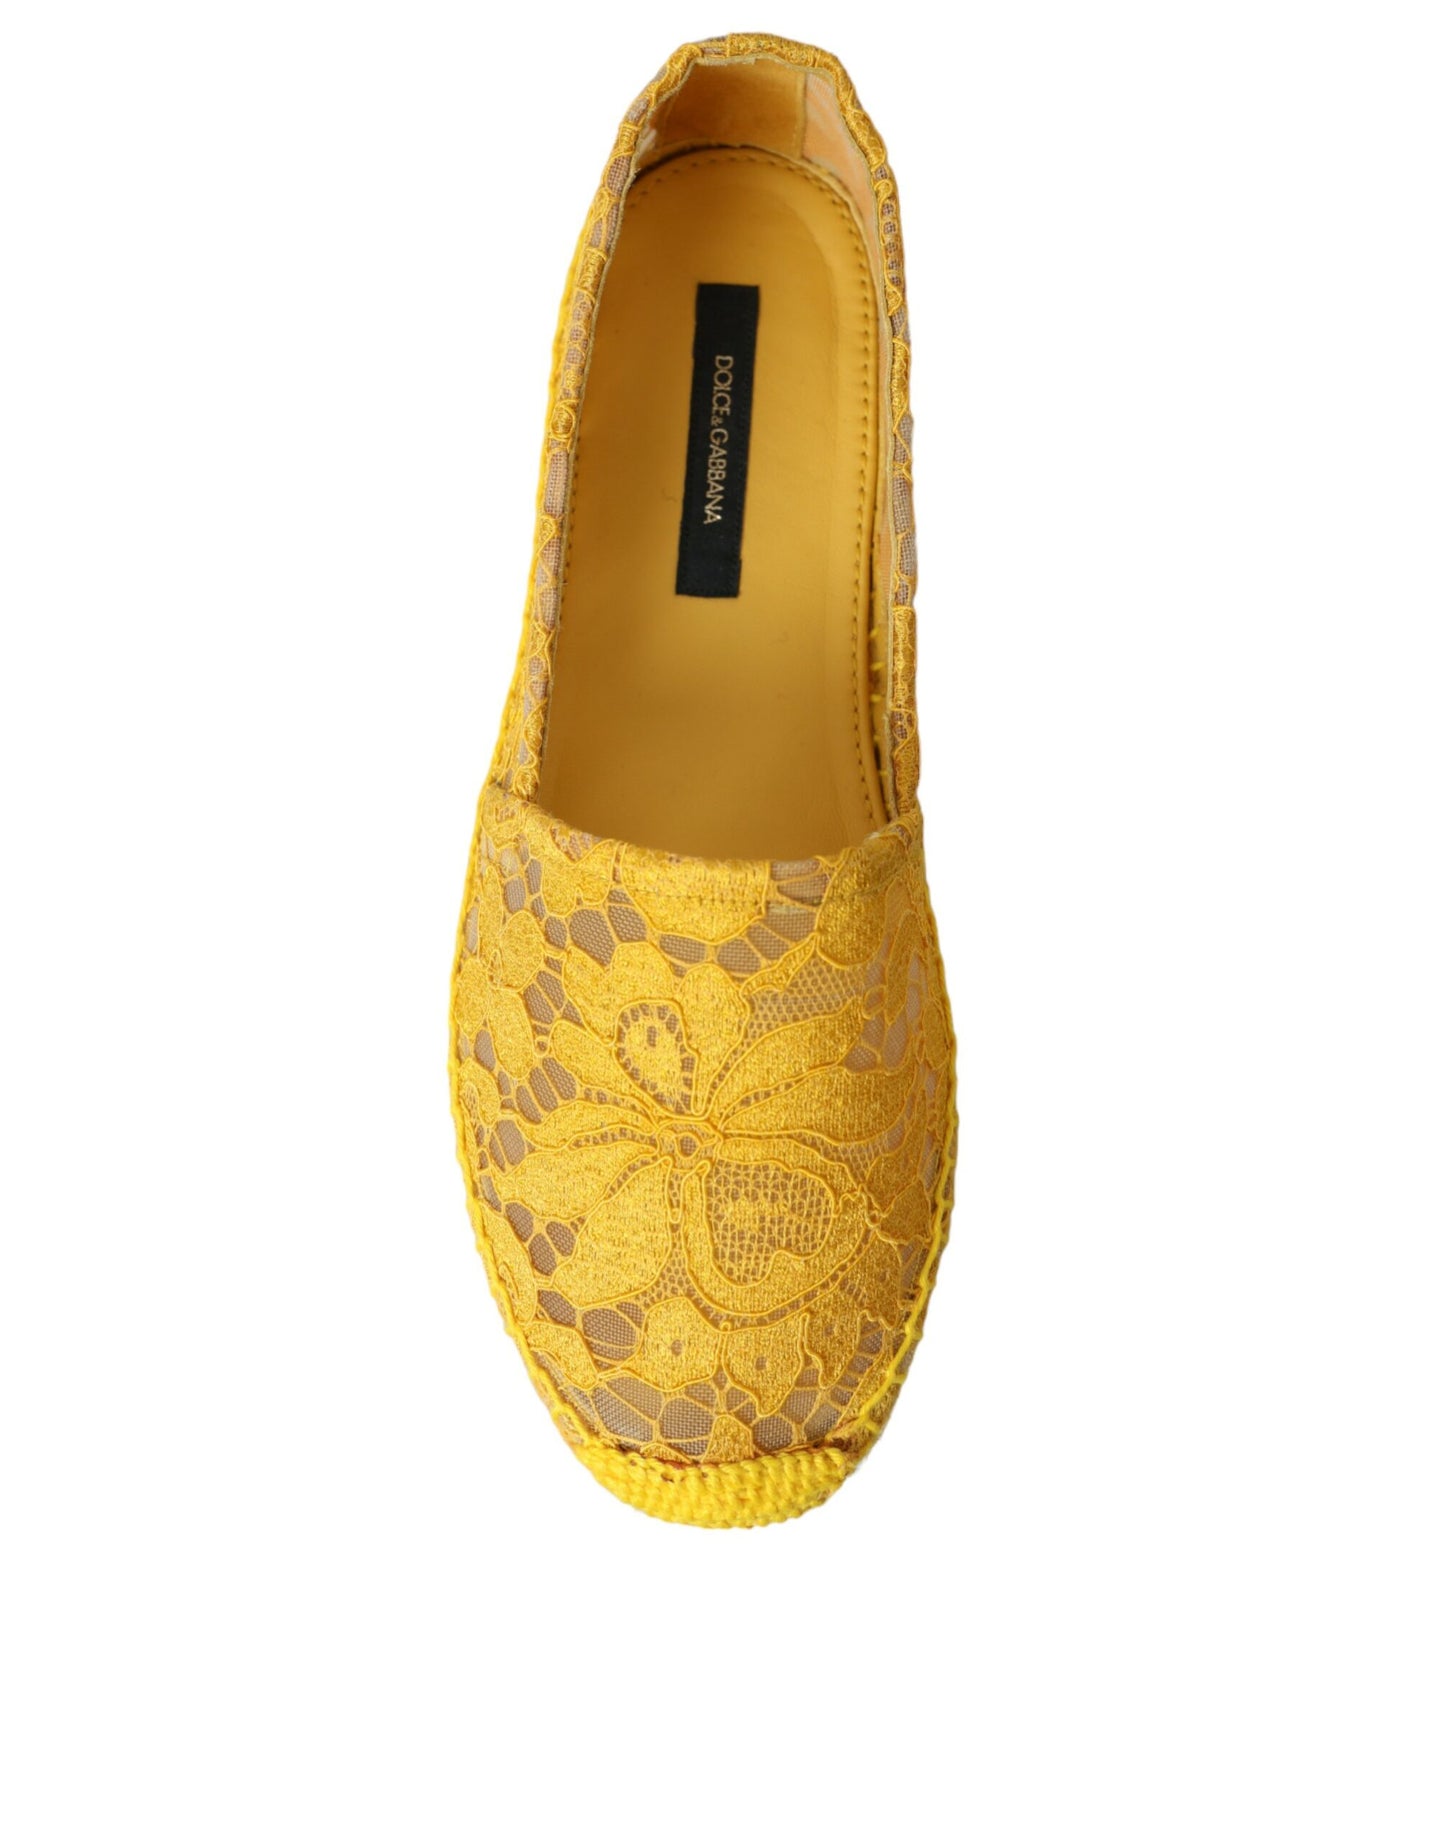 Dolce & Gabbana Yellow Taormina Lace Espadrille Loafers Flats Shoes